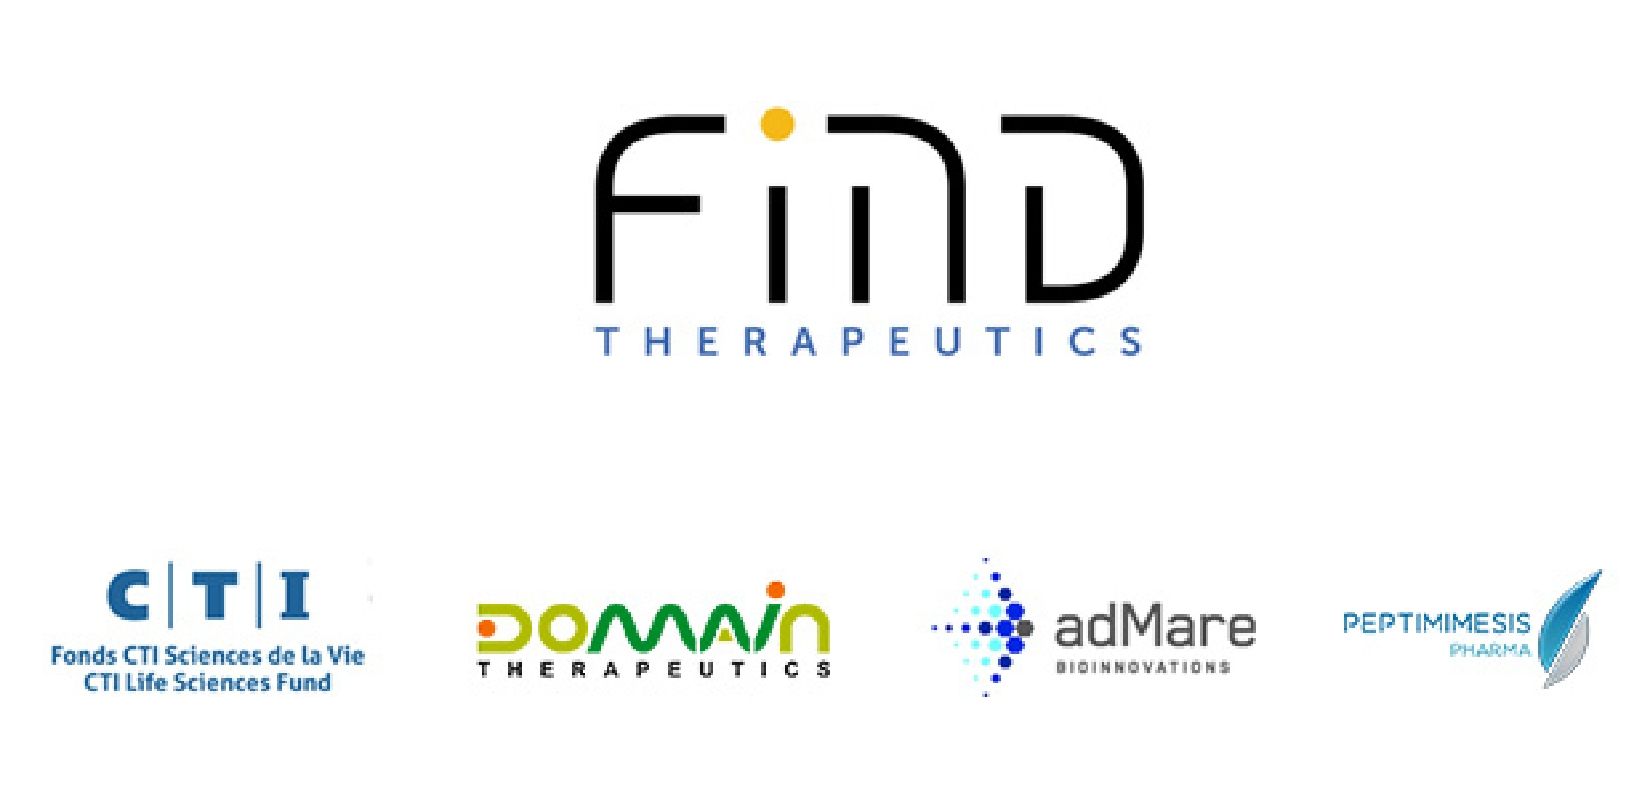 Find Therapeutics, a new drug development company dedicated to breakthrough therapies against rare diseases launches in Montreal